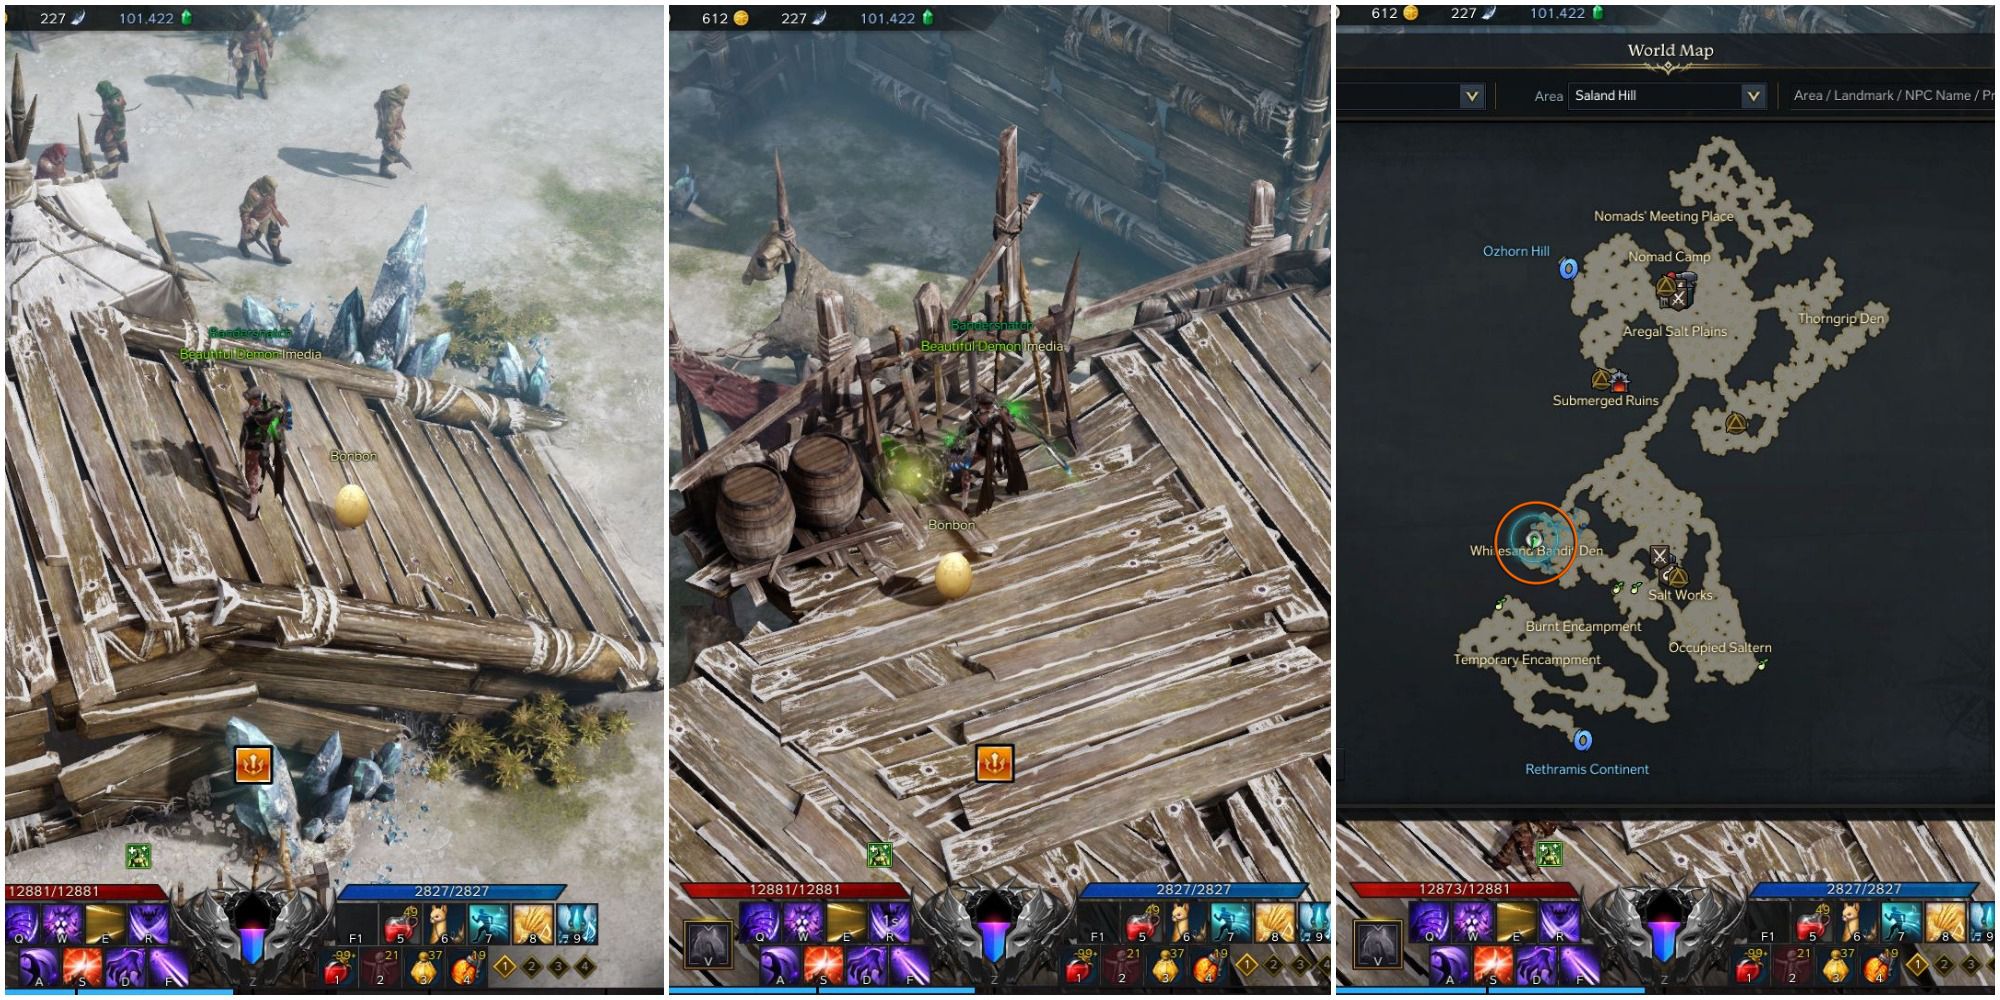 A split image of a player on a wooden ramp, a player beside a Mokoko seed on a wooden deck, and a map of Saland Hill